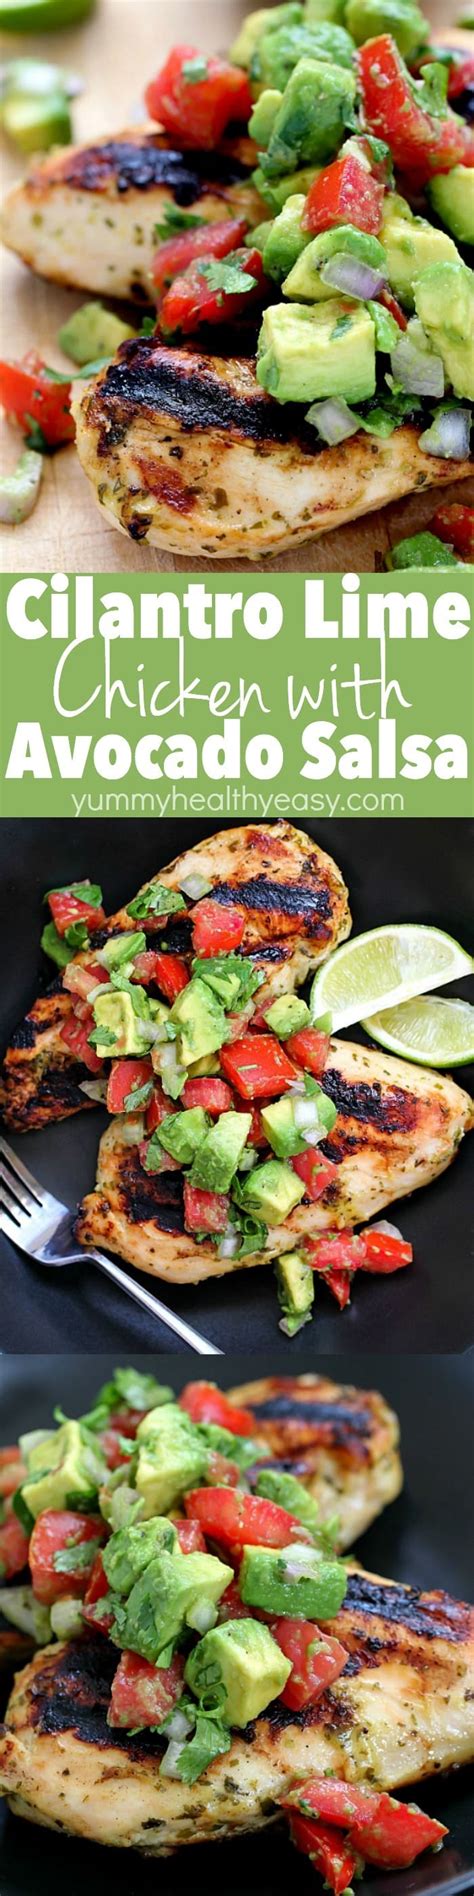 Combine the cilantro, lime juice & zest, olive oil, salt and pepper together in a large zip lock bag and mix well. Cilantro Lime Chicken with Avocado Salsa - Yummy Healthy Easy